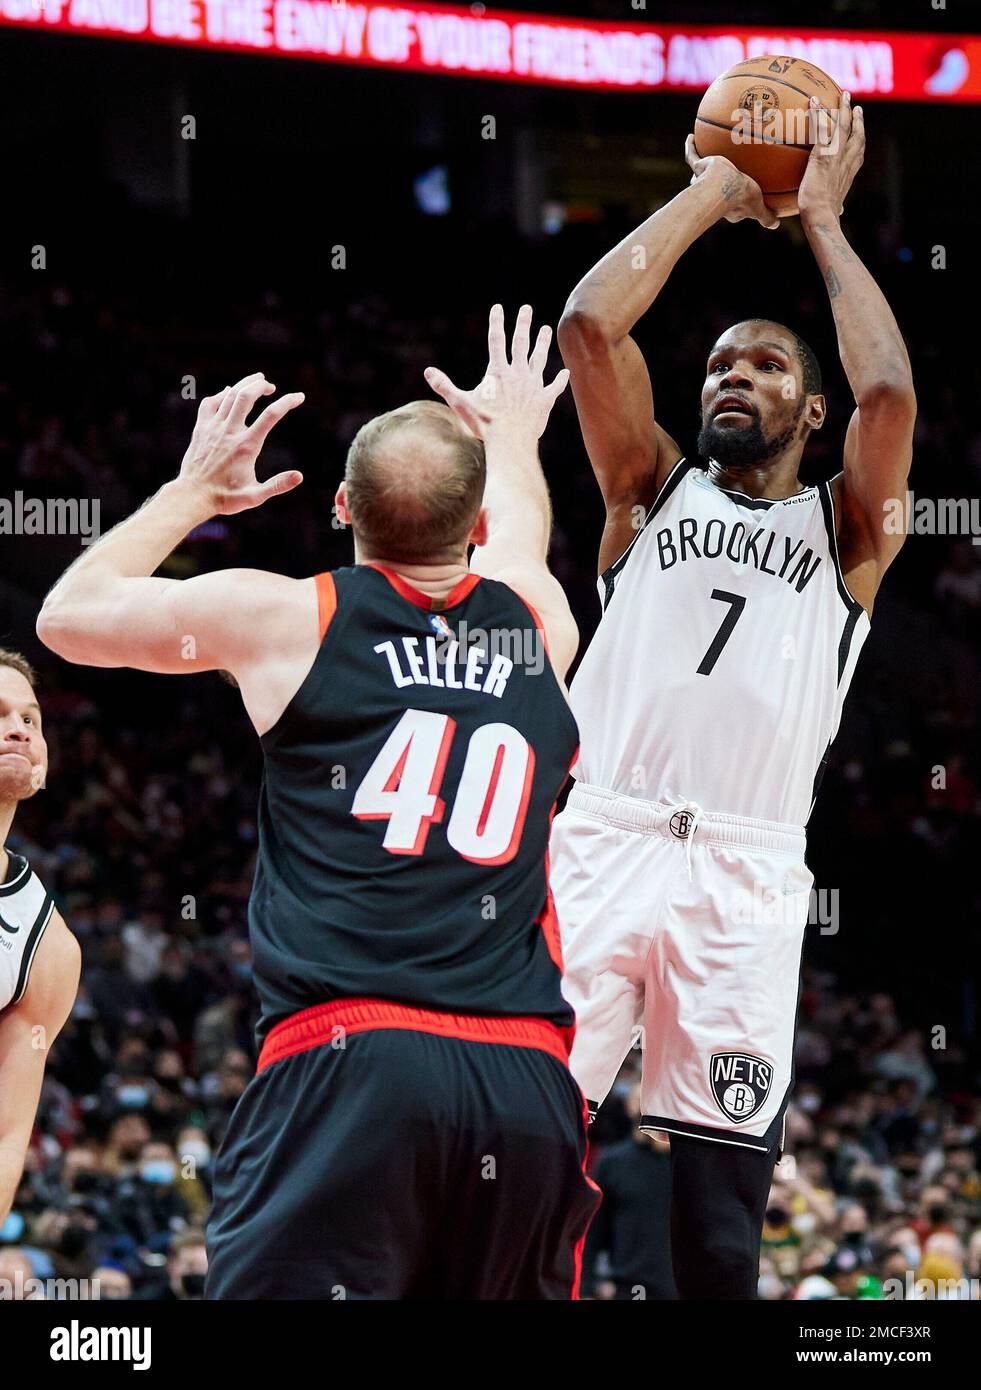 Brooklyn Nets forward Kevin Durant, right, shoots over Portland Trail  Blazers center Cody Zeller during the second half of an NBA basketball game  in Portland, Ore., Monday, Jan. 10, 2022. (AP Photo/Craig